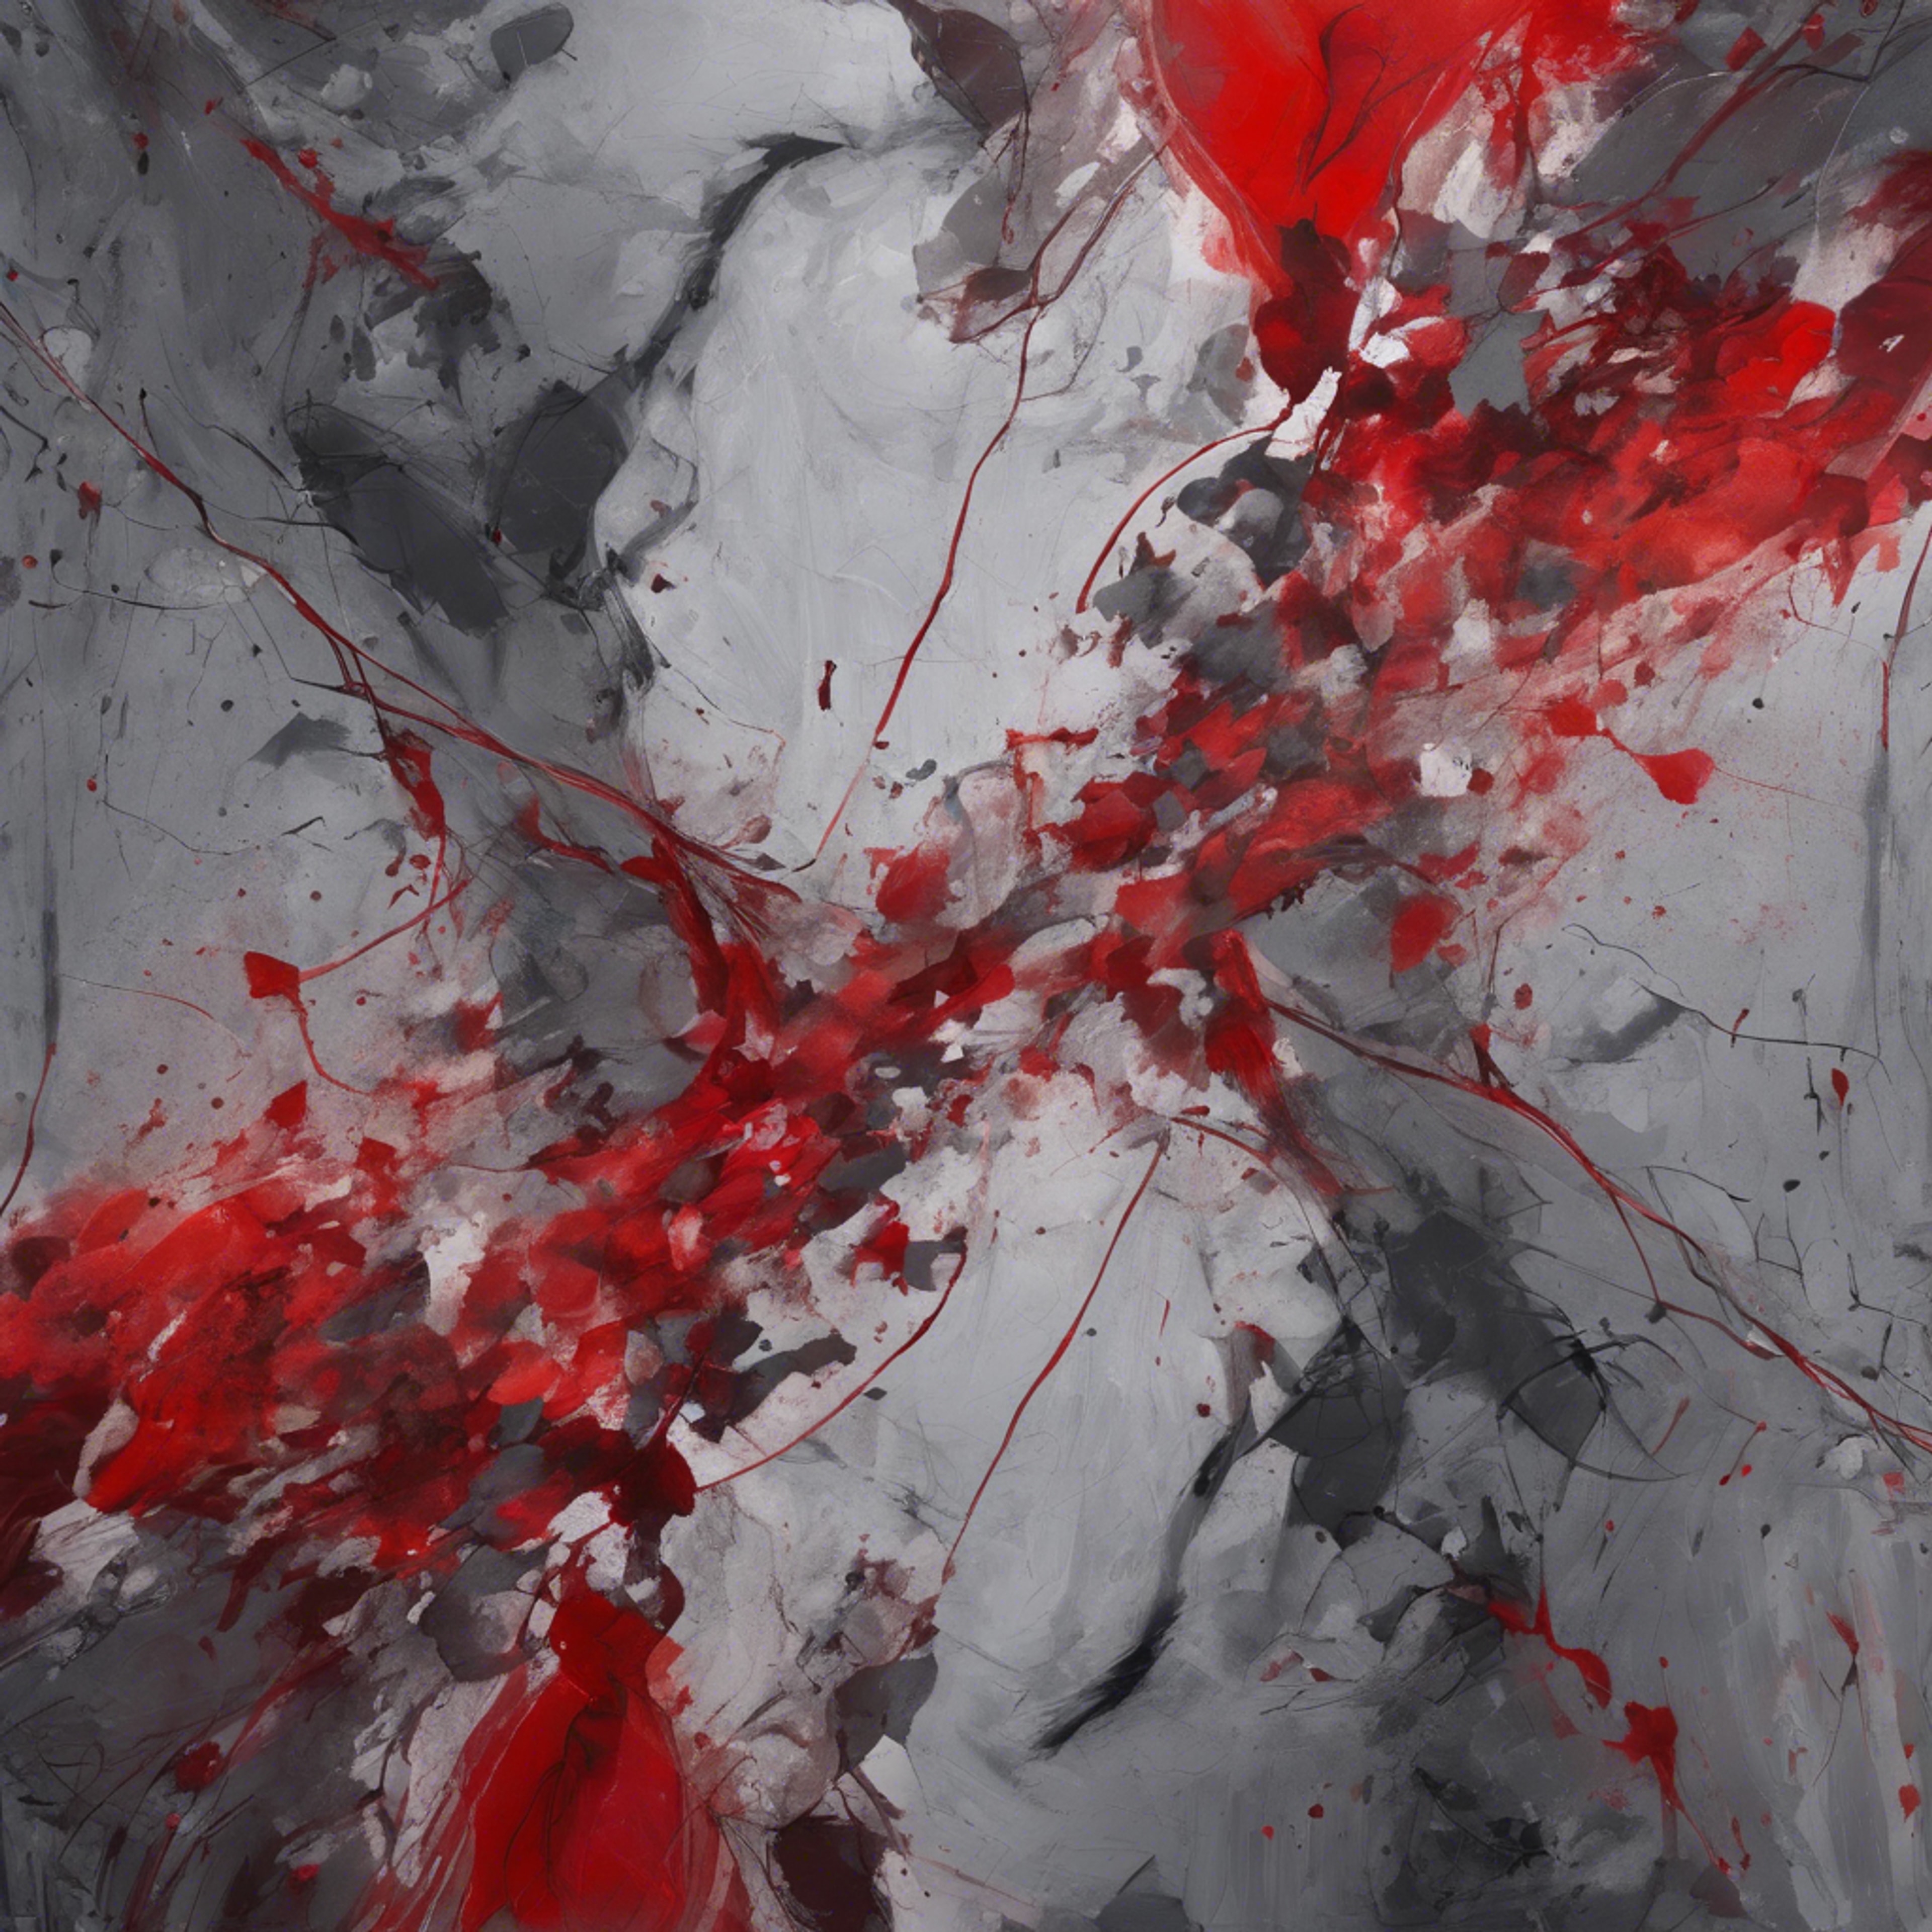 A red and gray abstract painting demonstrating the battle between passion and reason. Дэлгэцийн зураг[fb490a5db02d428289d0]